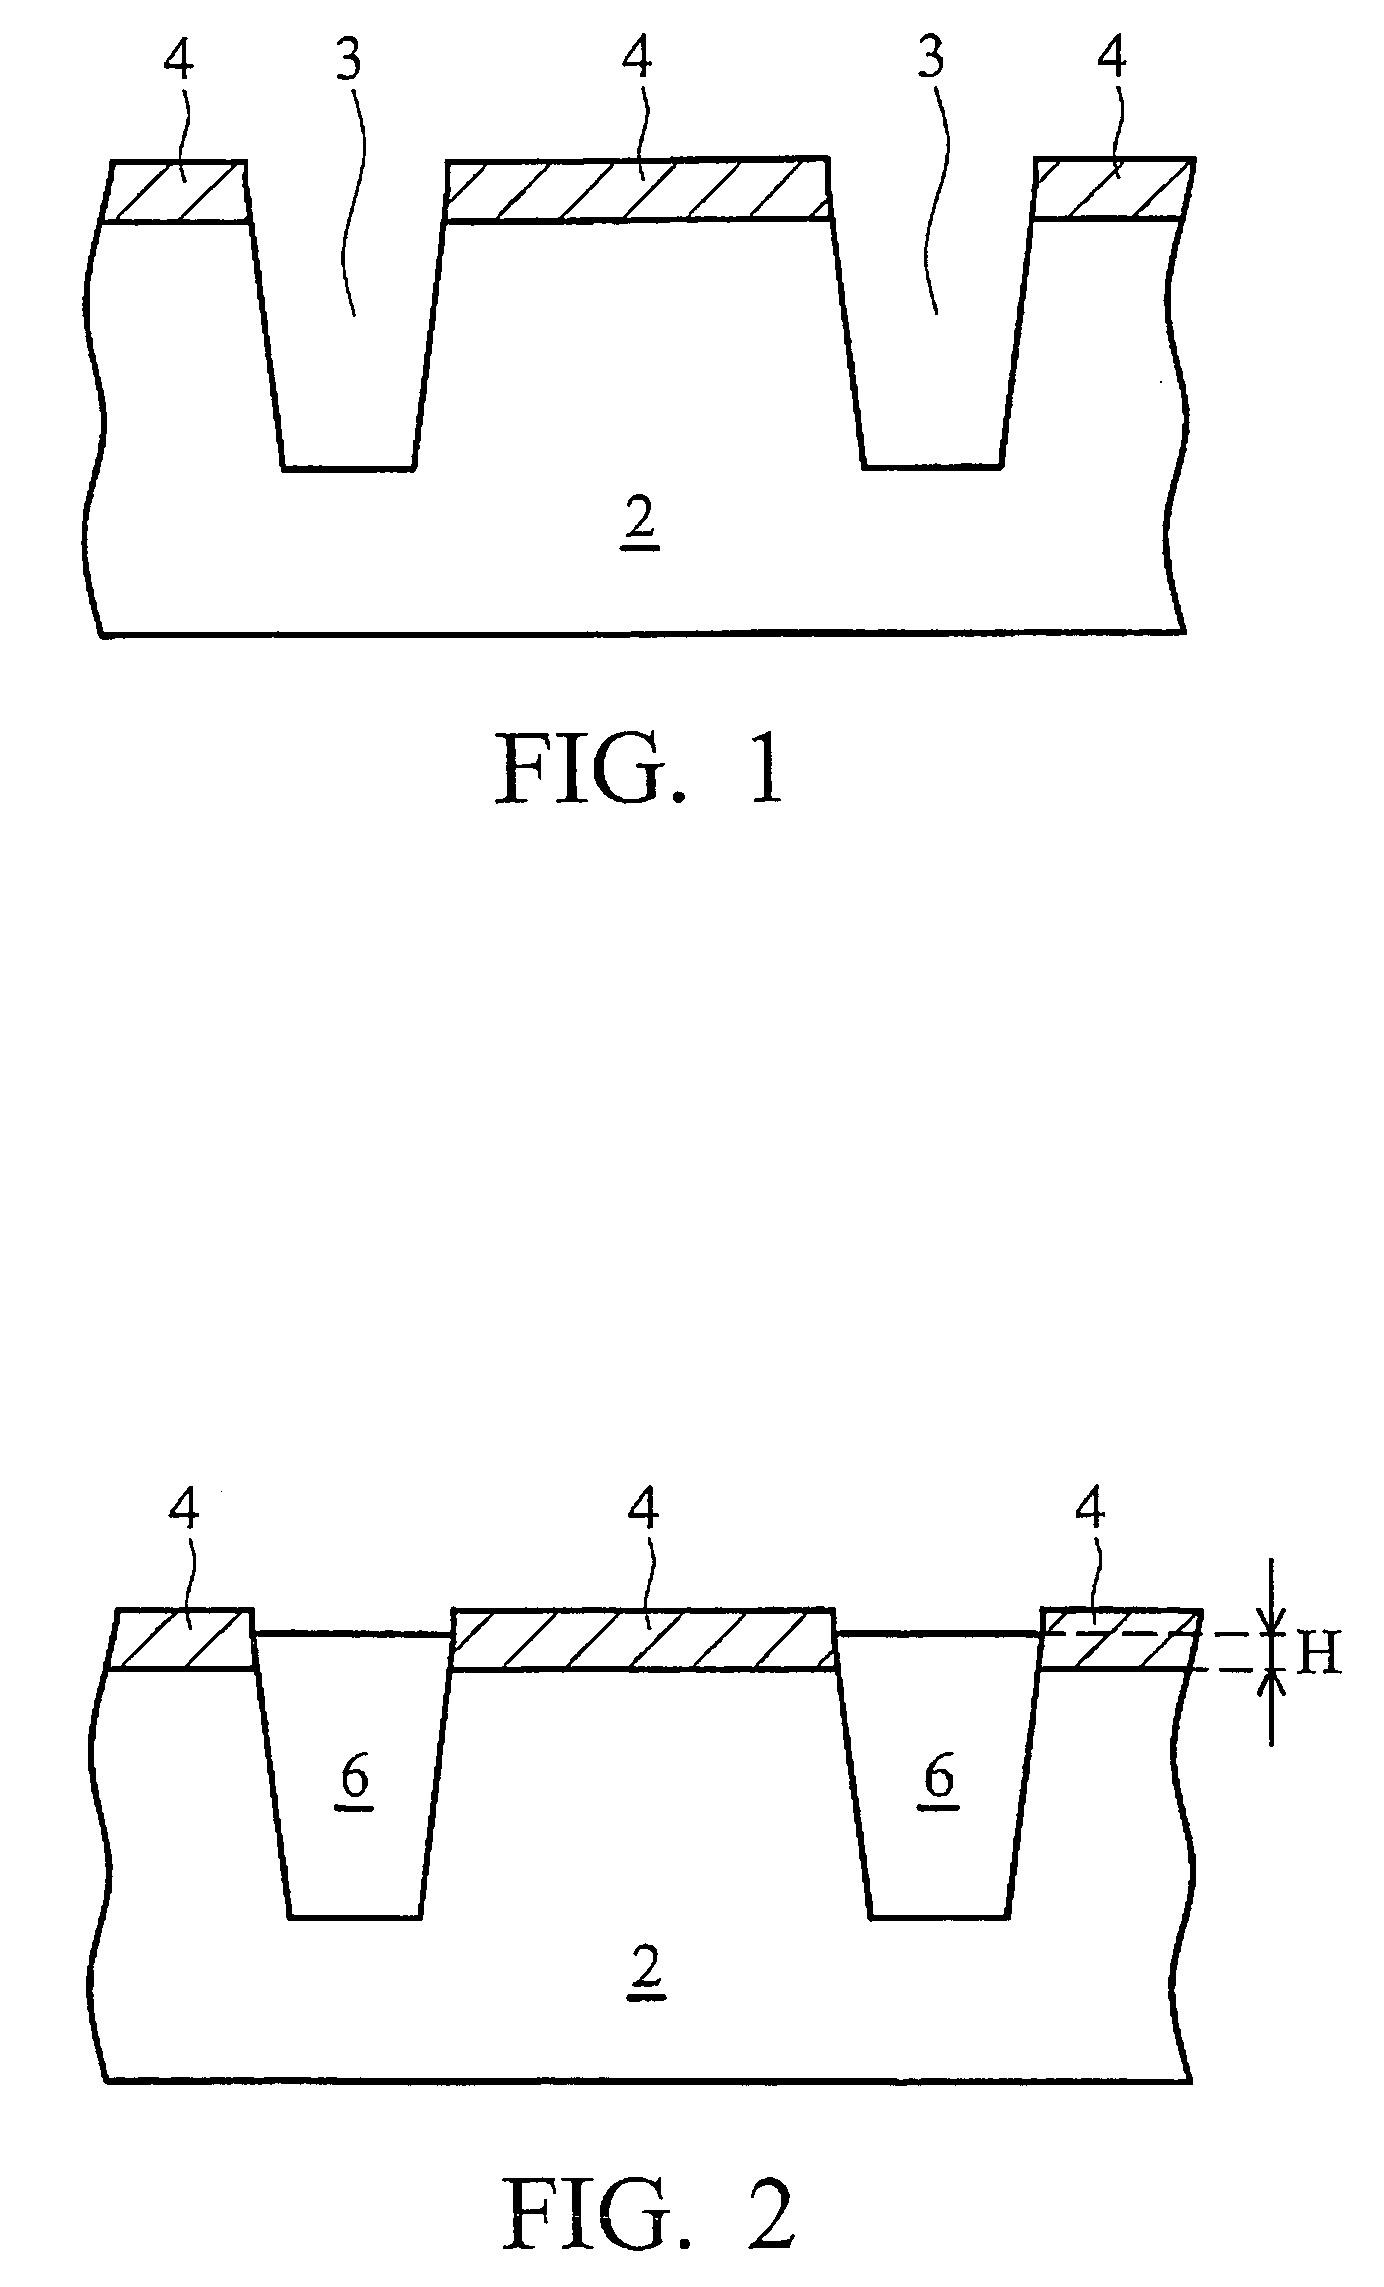 Controlling system for gate formation of semiconductor devices